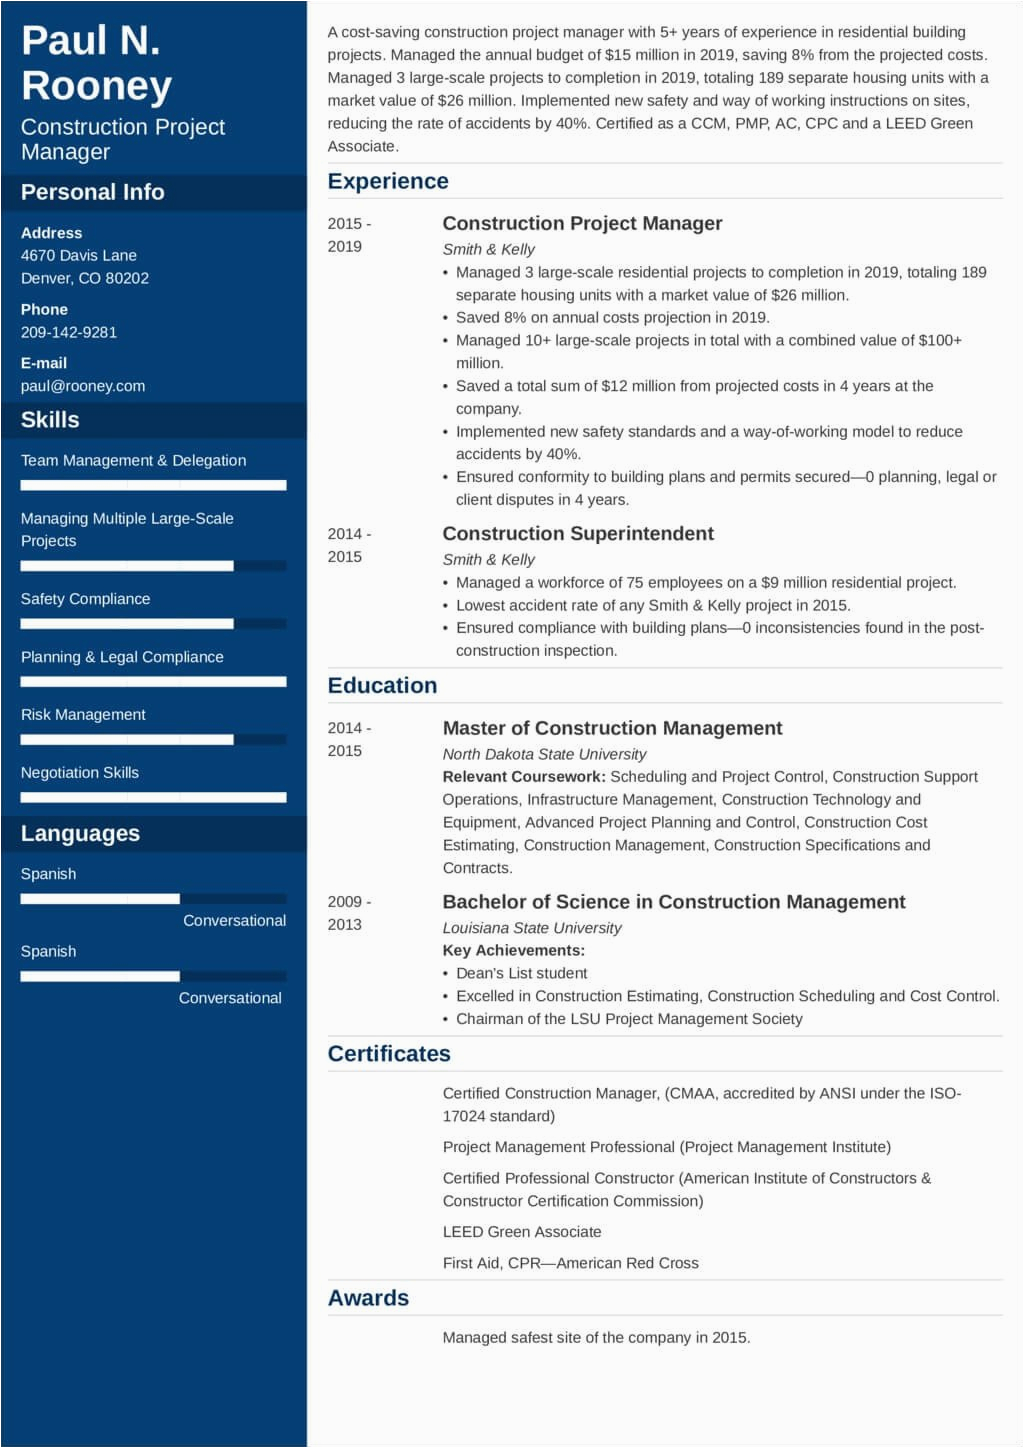 Resume Sample for Construction Project Manager Construction Project Manager Resume—sample and 25 Tips